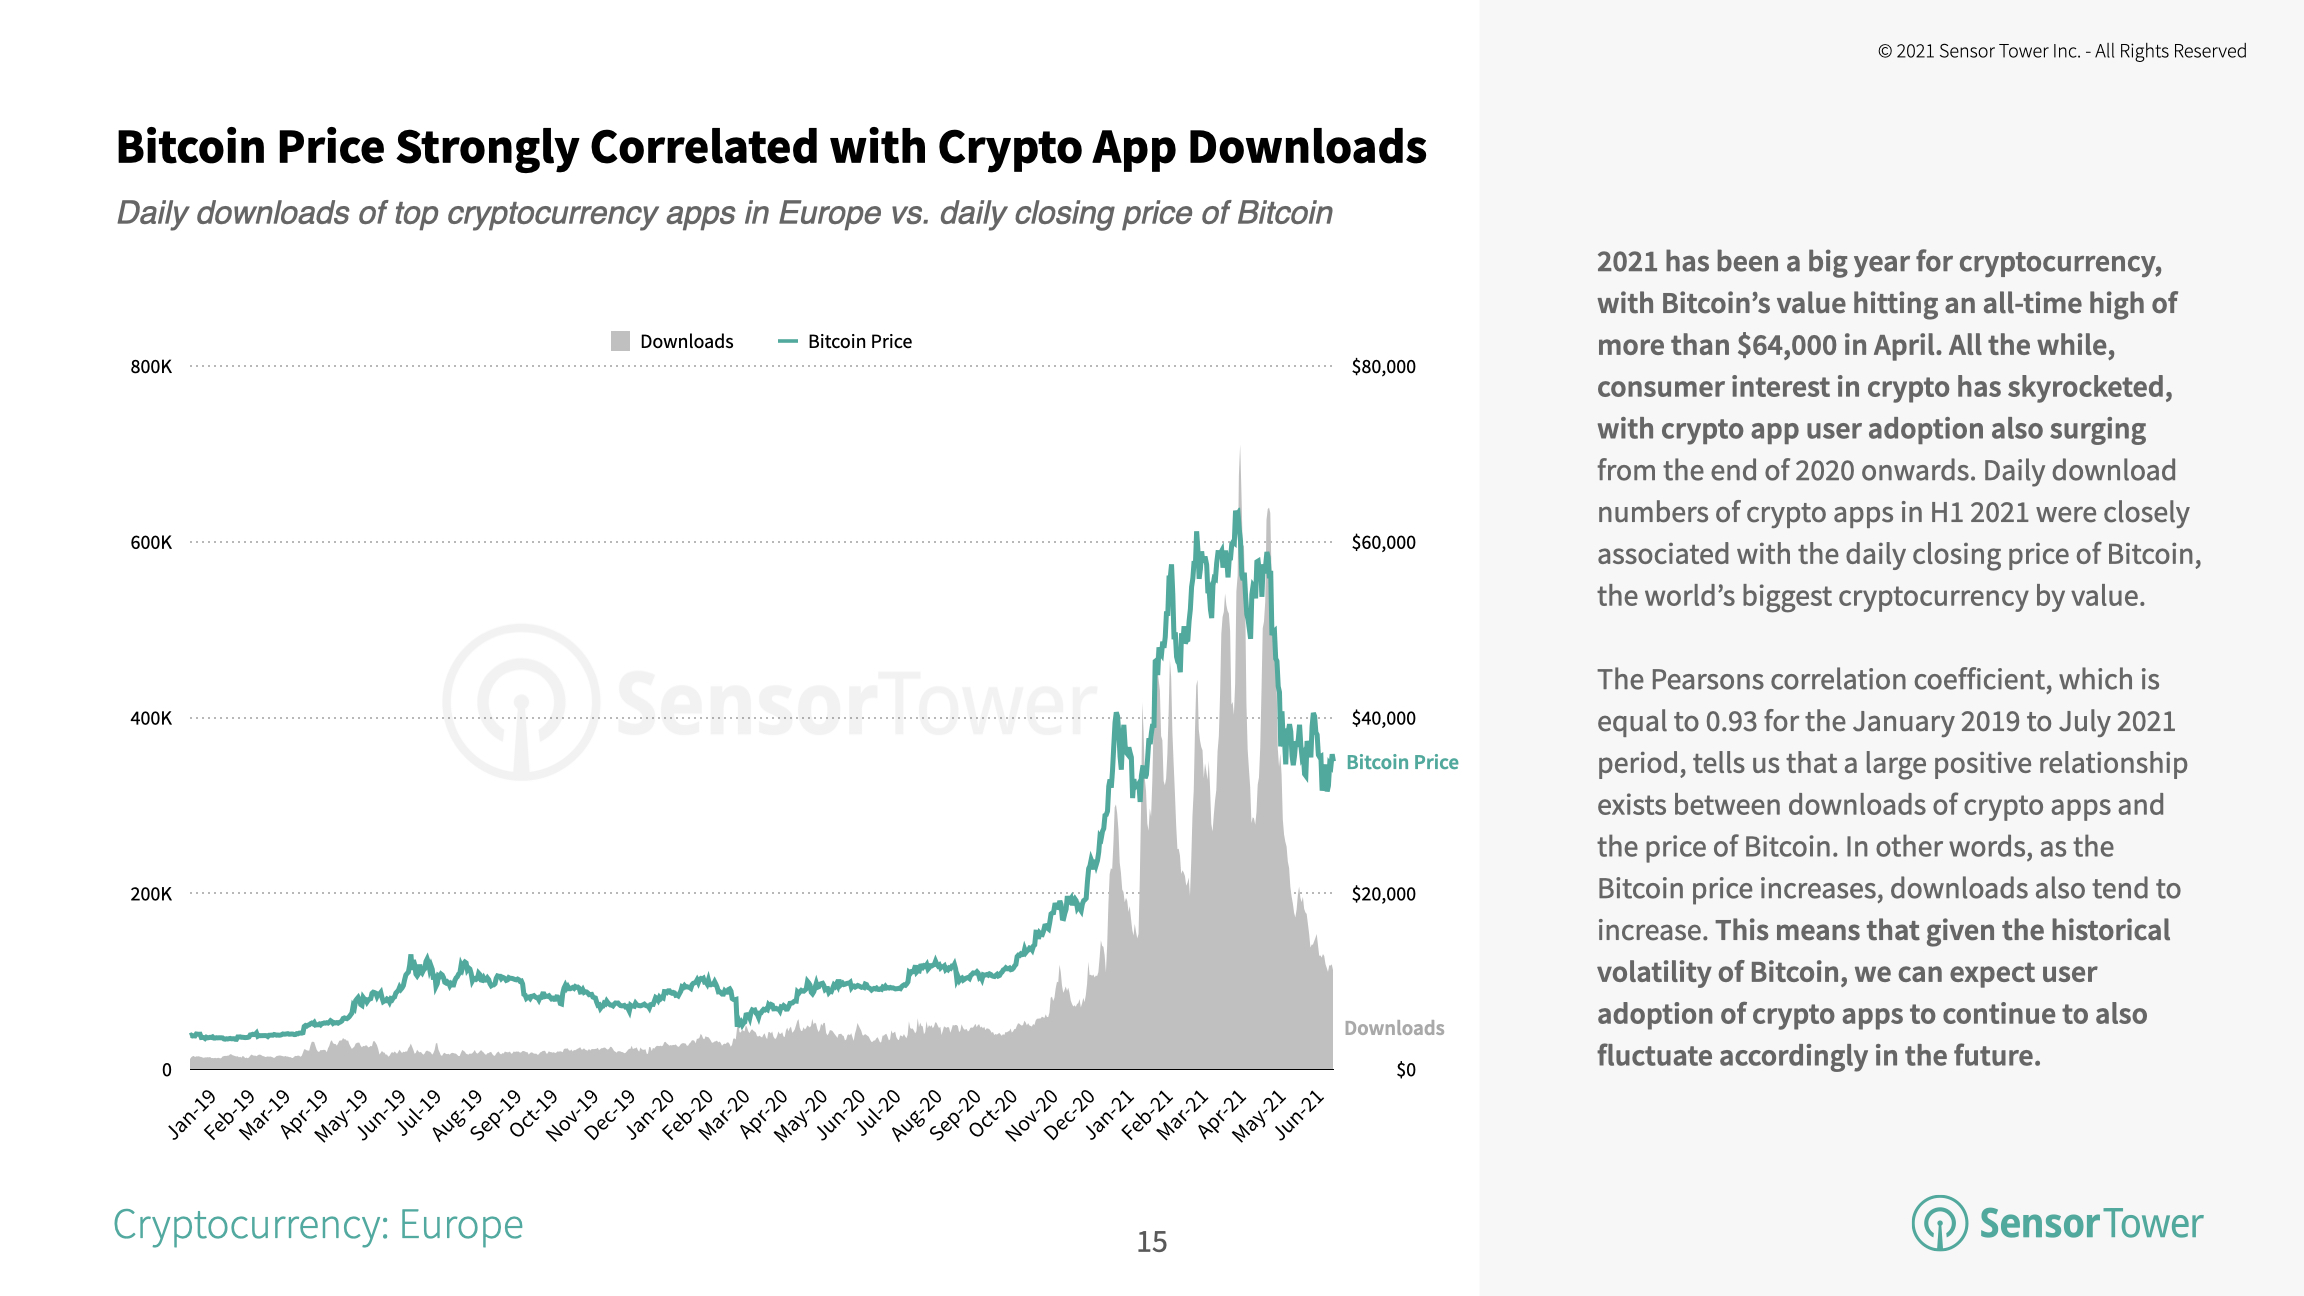 Collective downloads of the top cryptocurrency apps in Europe peaked on April 17, 2021.